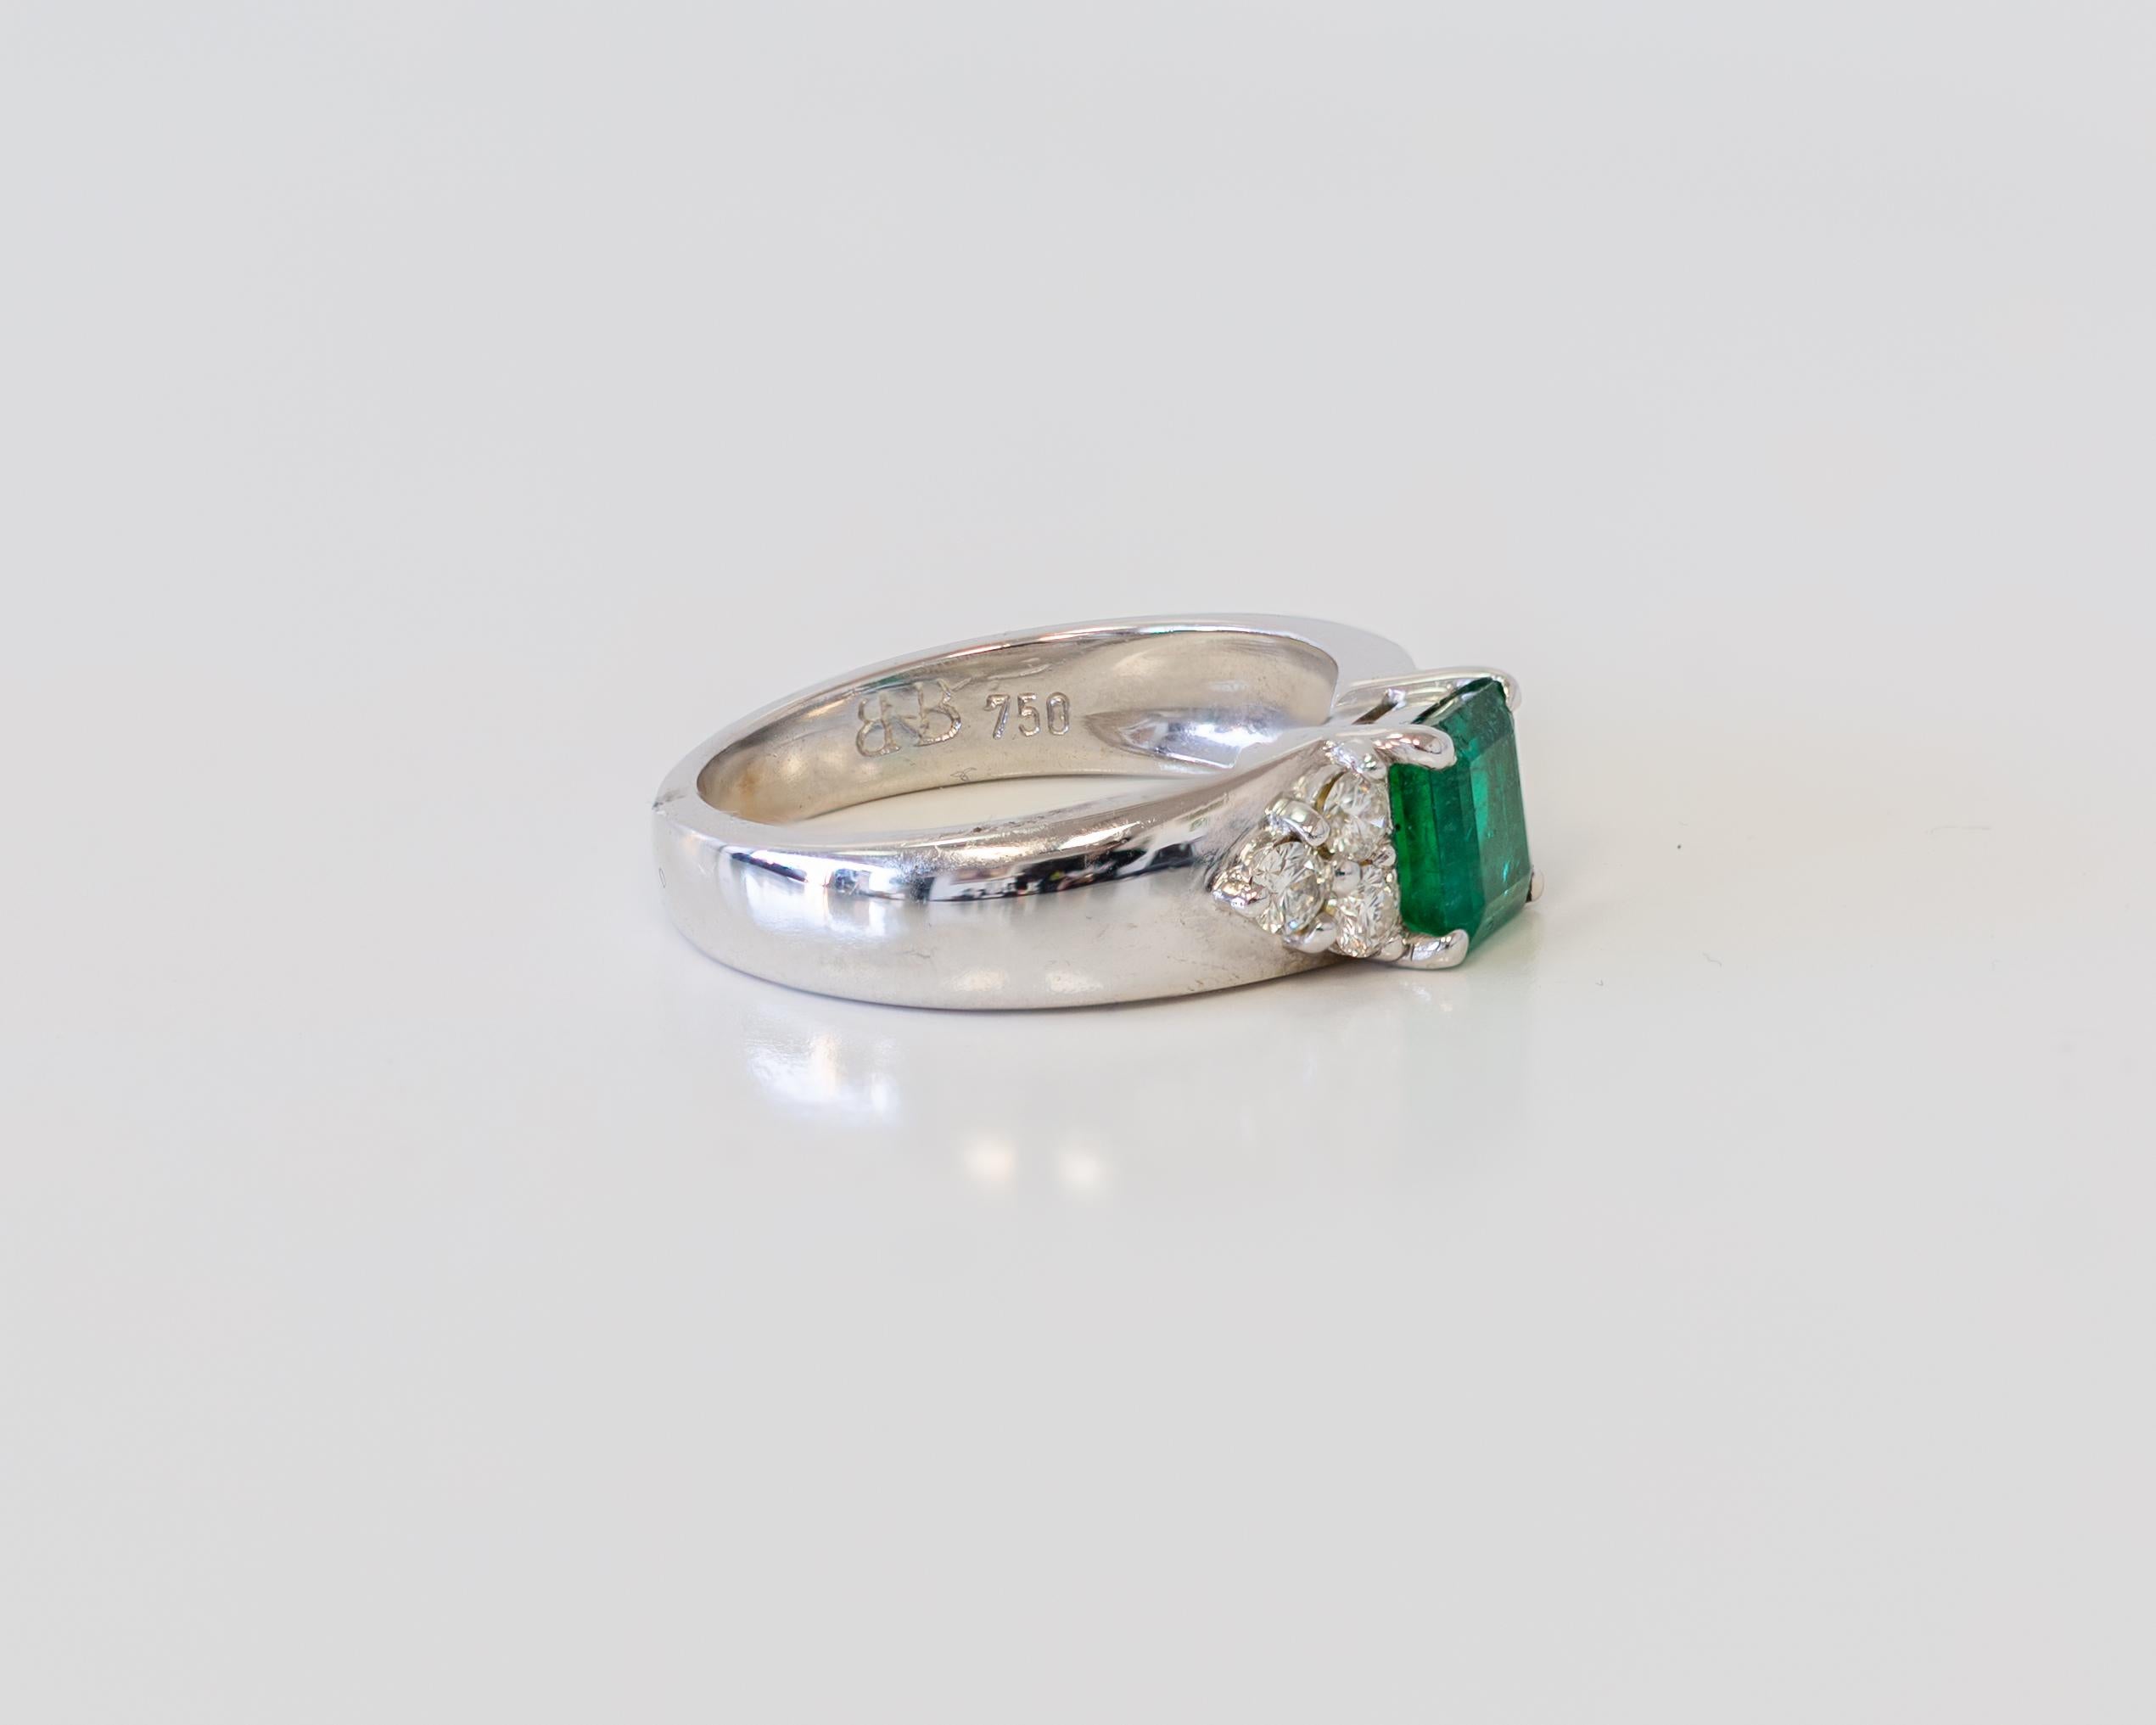 Basic Info
NB00050
18K White Gold 
Engagement Ring with Princess Cut 0.90ct Emerald Center Stone & Side Diamonds.
Emerald Size Aprx 0.90ct
Diamond Size 0.05ct x 6 Total 0.30ct H color SI1 Clarity
Ring Size 6
Total Ring weight 6.0 Grams 
Setting